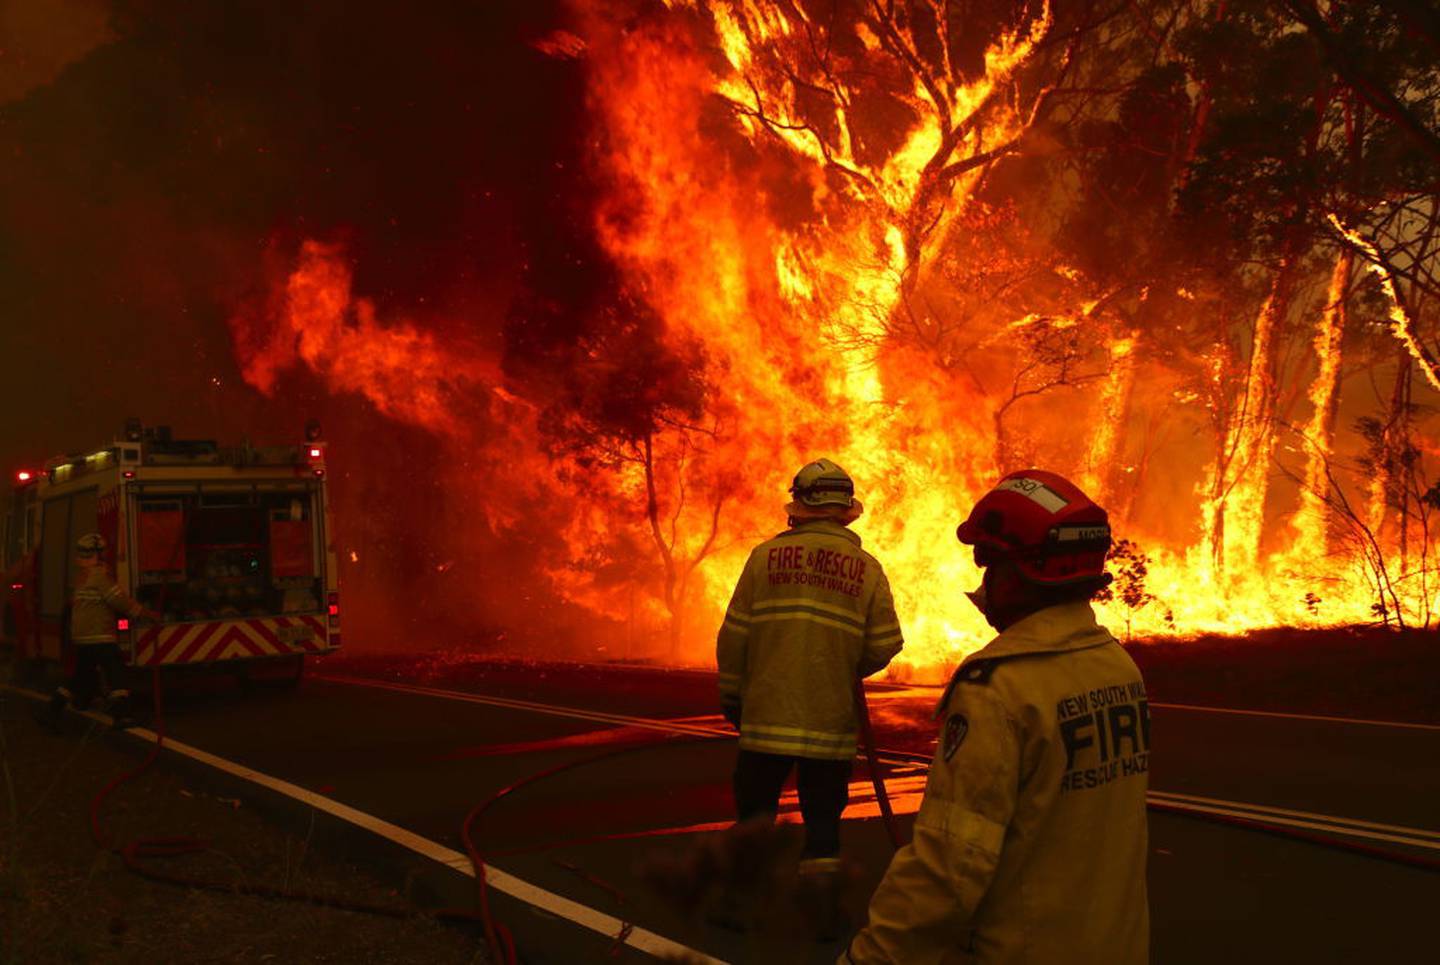 Fire and Rescue personal run to move their truck after a bushfire burns in extreme weather conditions next to a major road and homes on the outskirts of the town of Bilpin, NSW. Photo / Getty Images